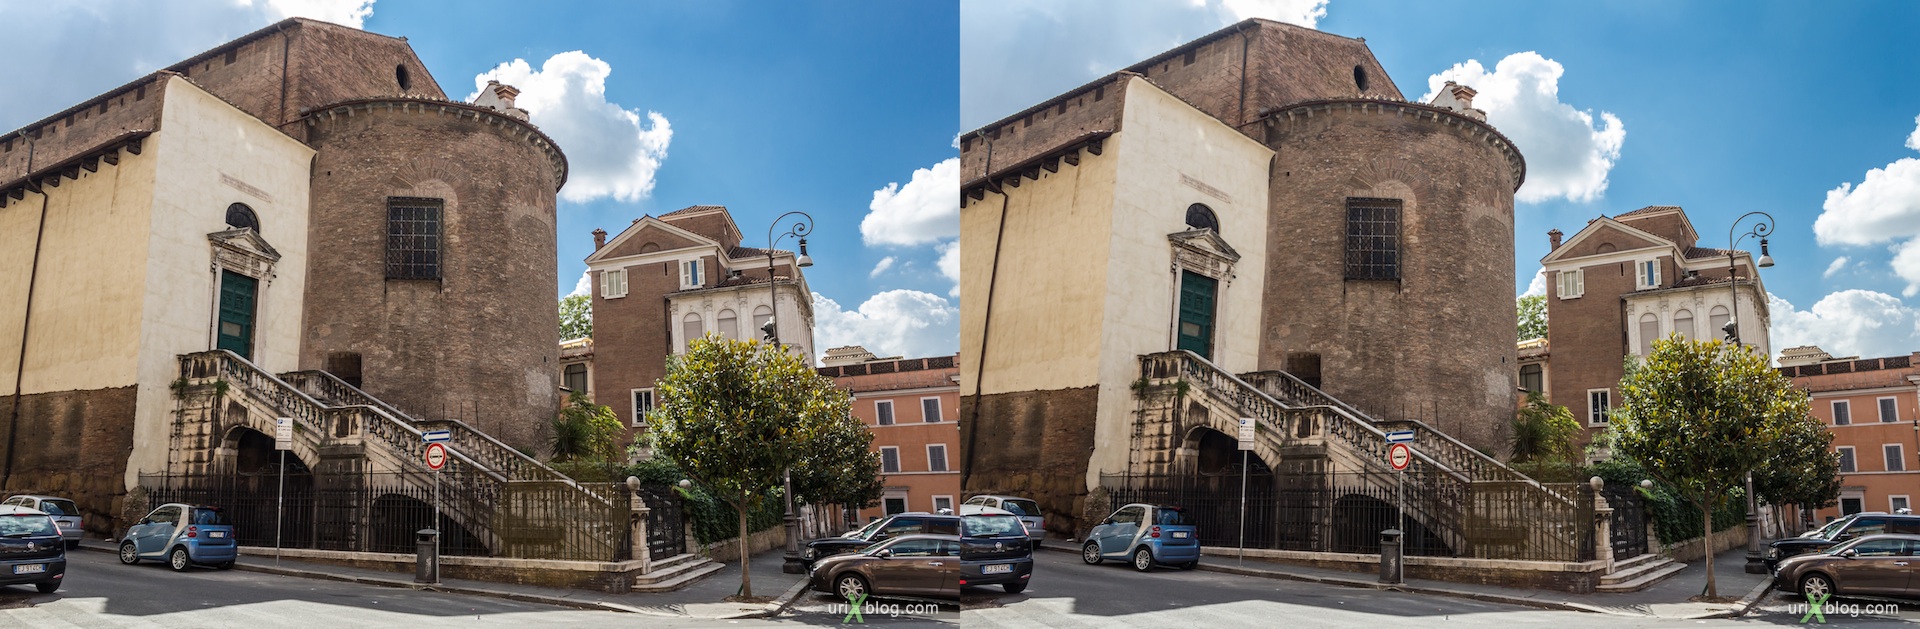 2012, church San Martino ai Monti, titolo Equizio, Rome, Italy, cathedral, monastery, Christianity, Catholicism, 3D, stereo pair, cross-eyed, crossview, cross view stereo pair